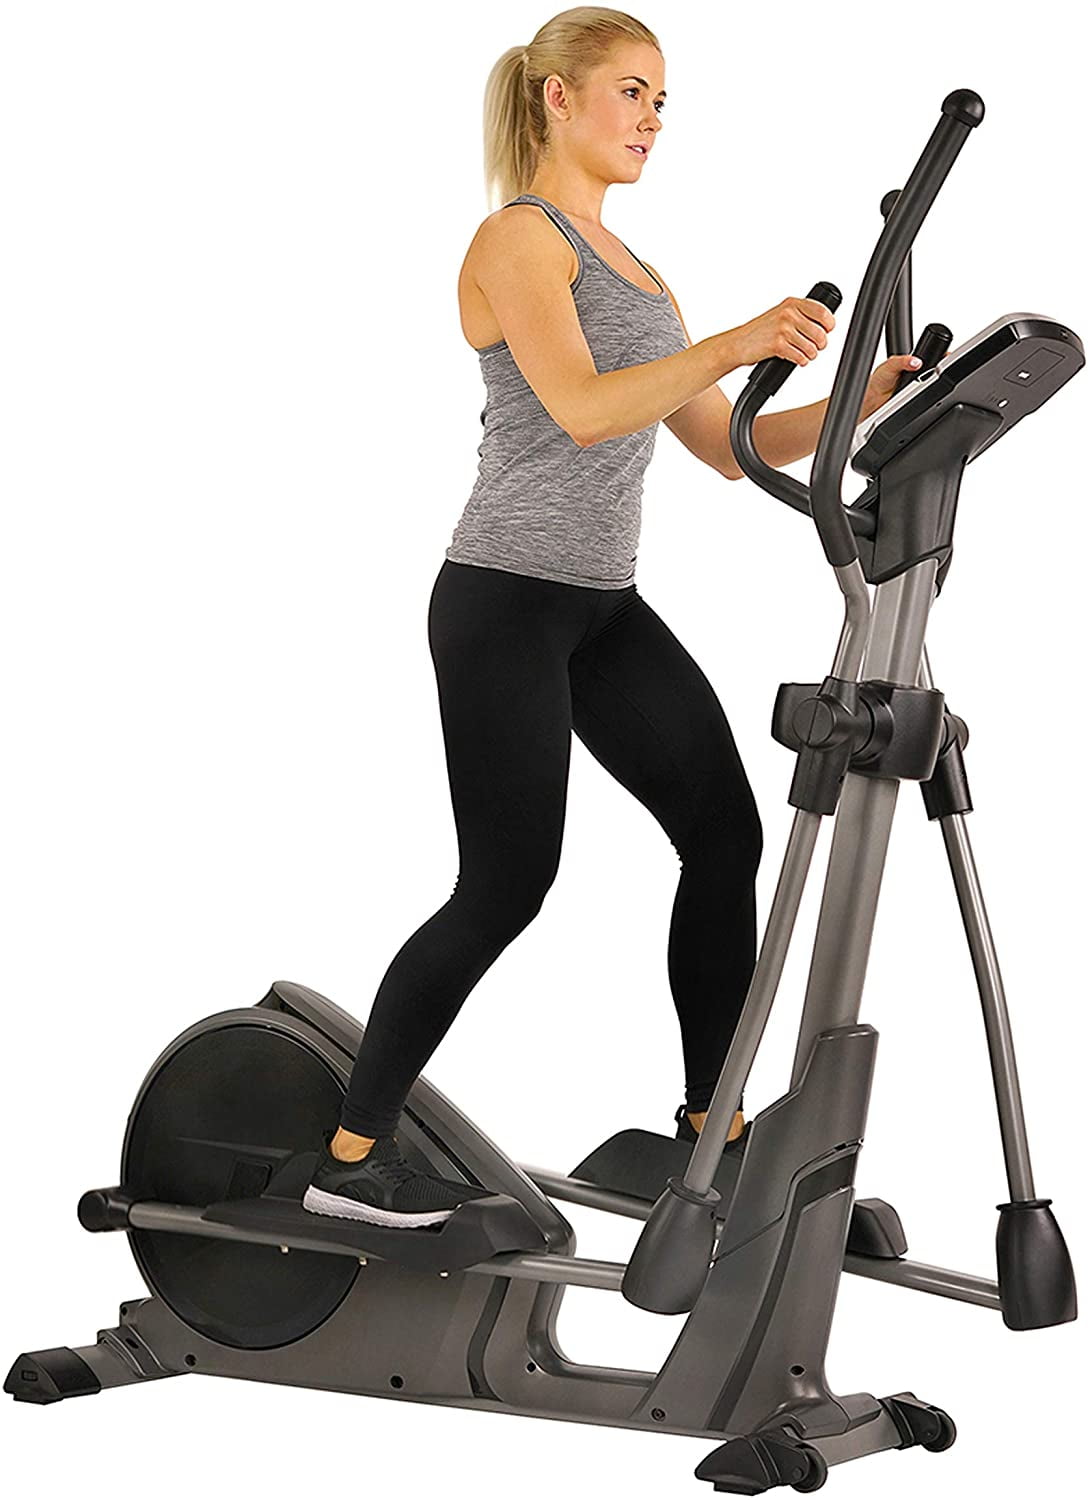 Sunny Health &amp; Fitness Magnetic Elliptical Trainer Machine w/Device Holder, Programmable Monitor and Heart Rate Monitoring, 330 LB Max Weight - SF-E3912, Silver